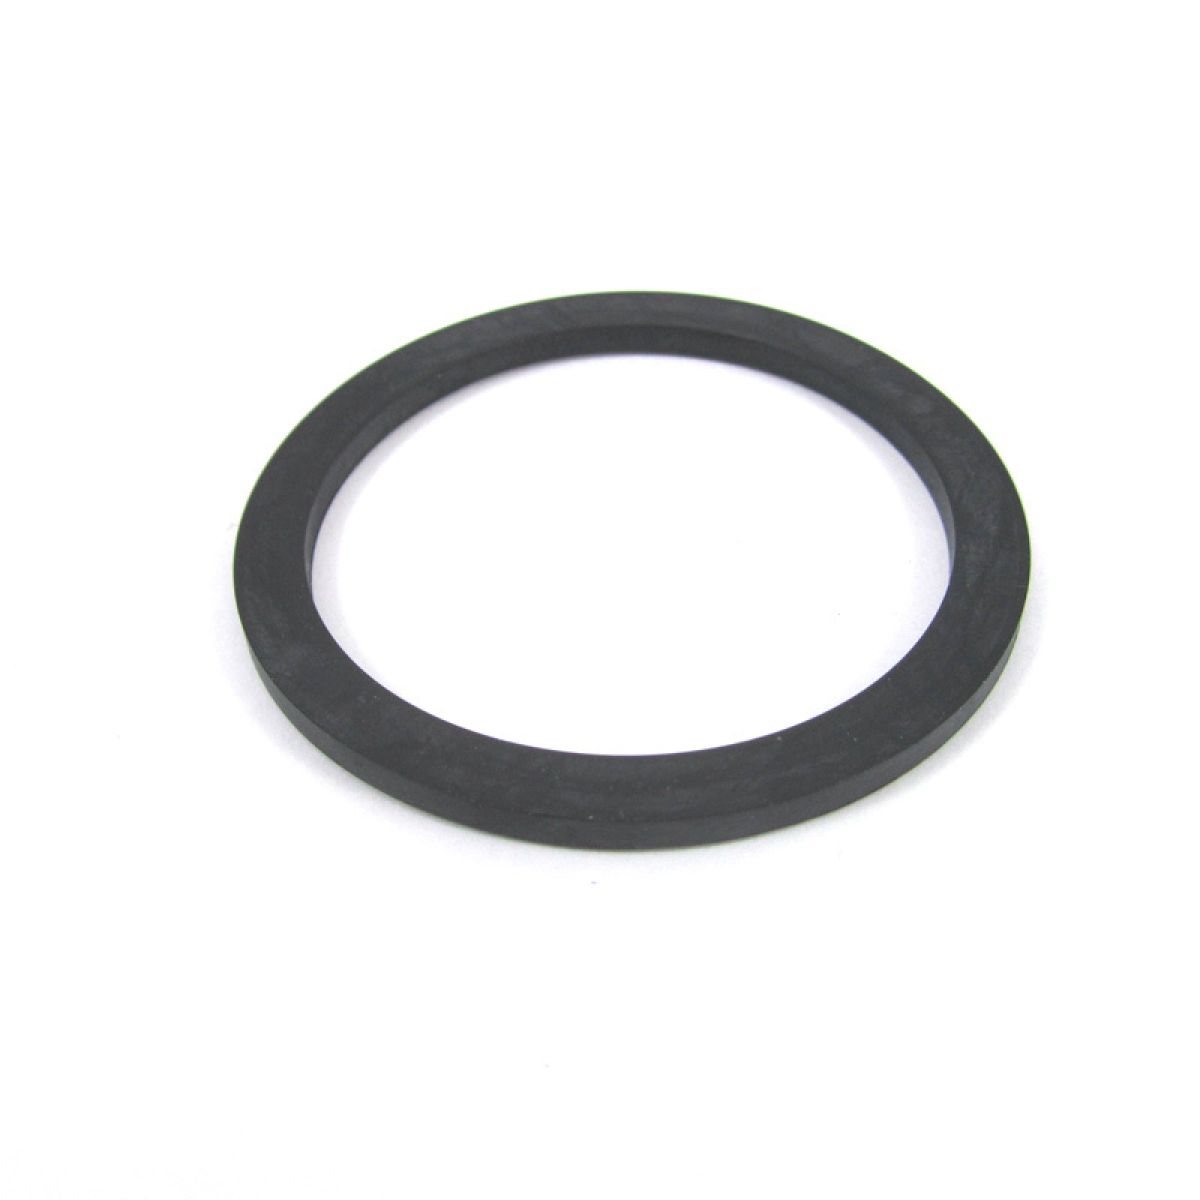 (27) Gasket for cover with Valve for Tornador-Z-020S